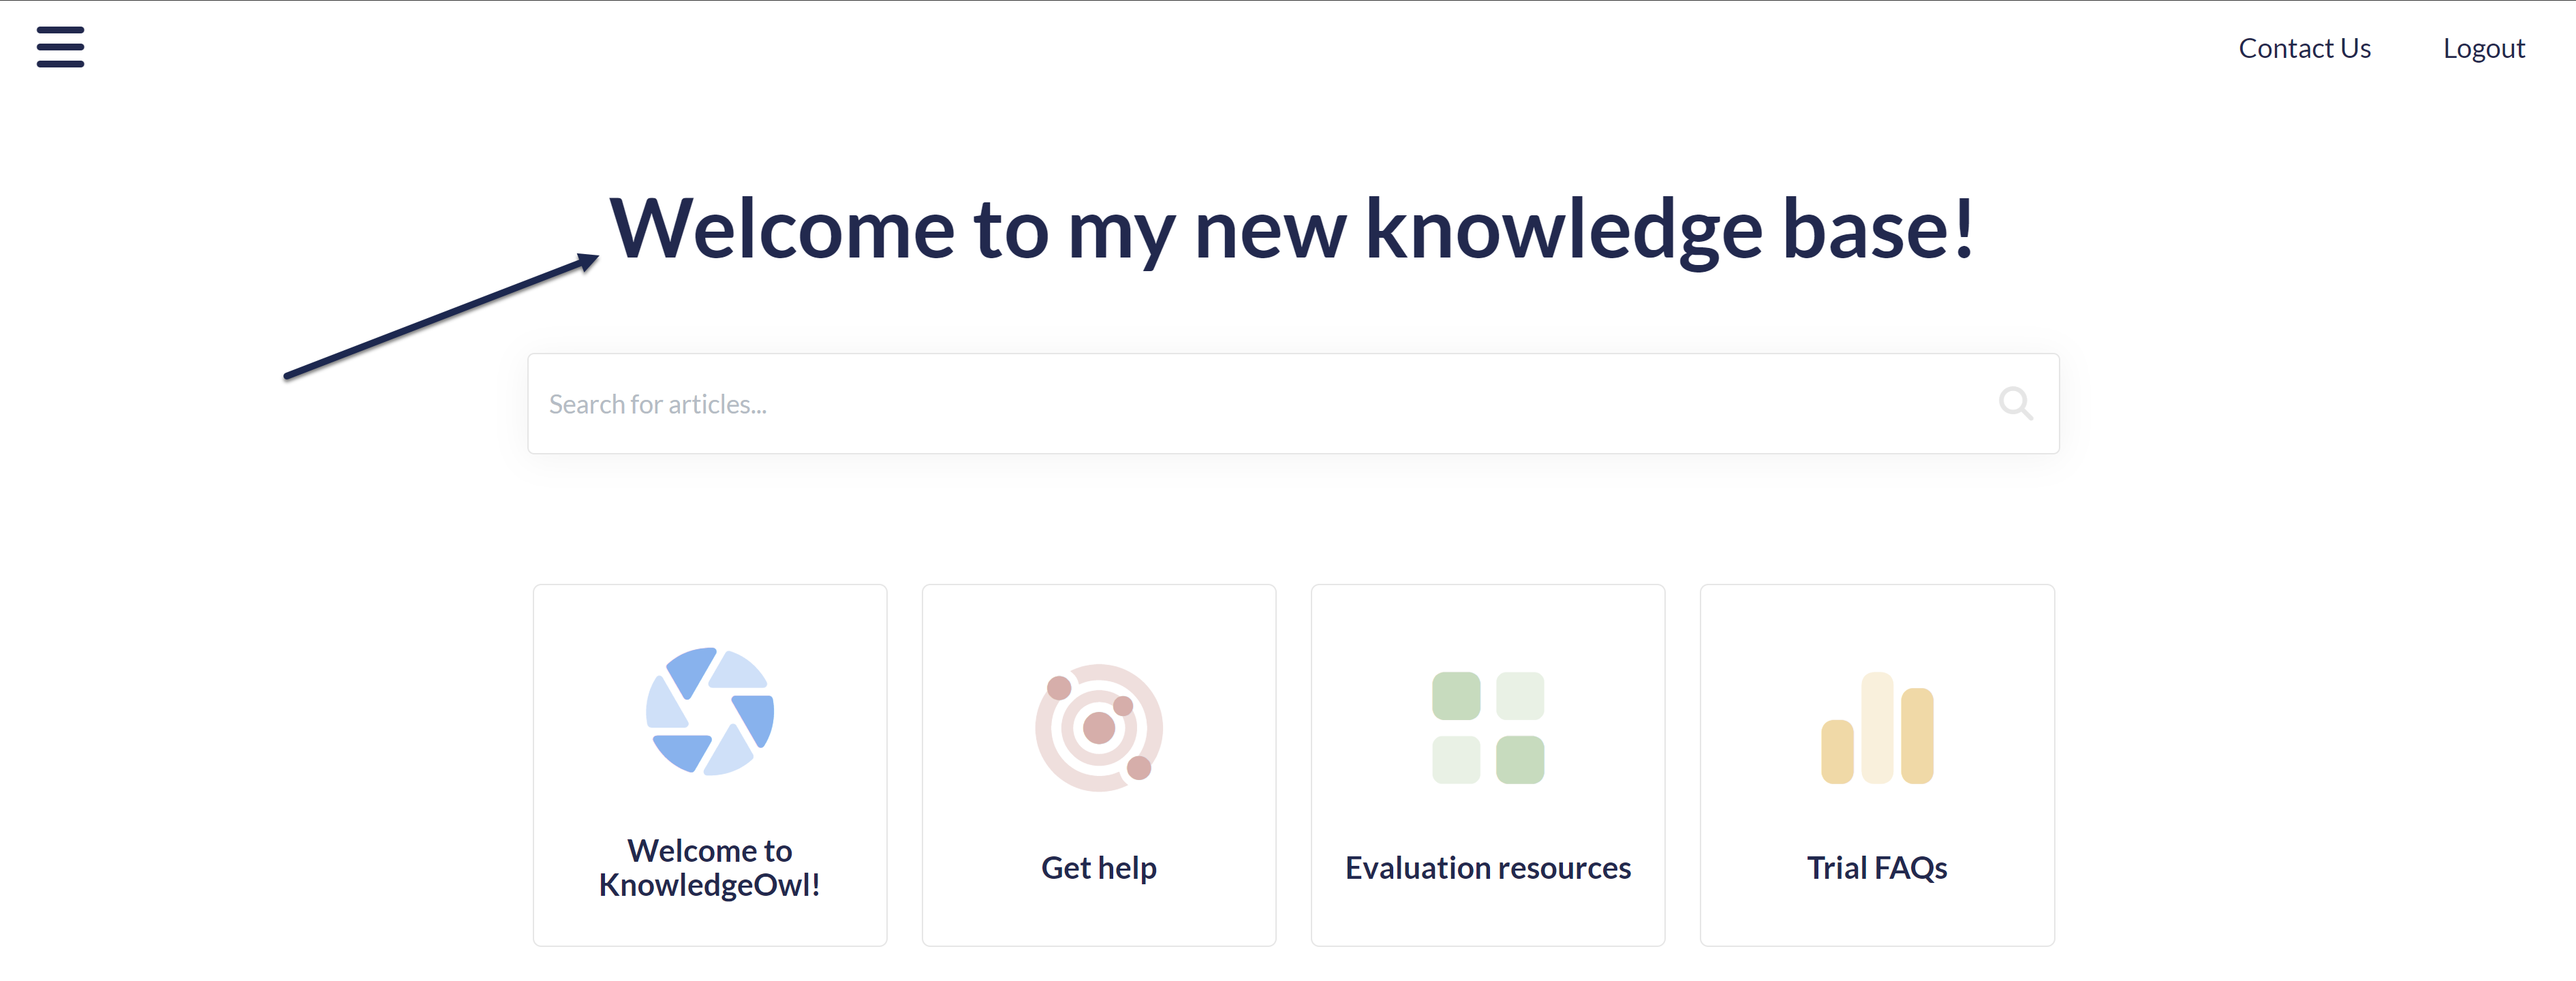 The homepage of a live knowledge base. An arrow points to the "Welcome to my new knowledge base!" statement.